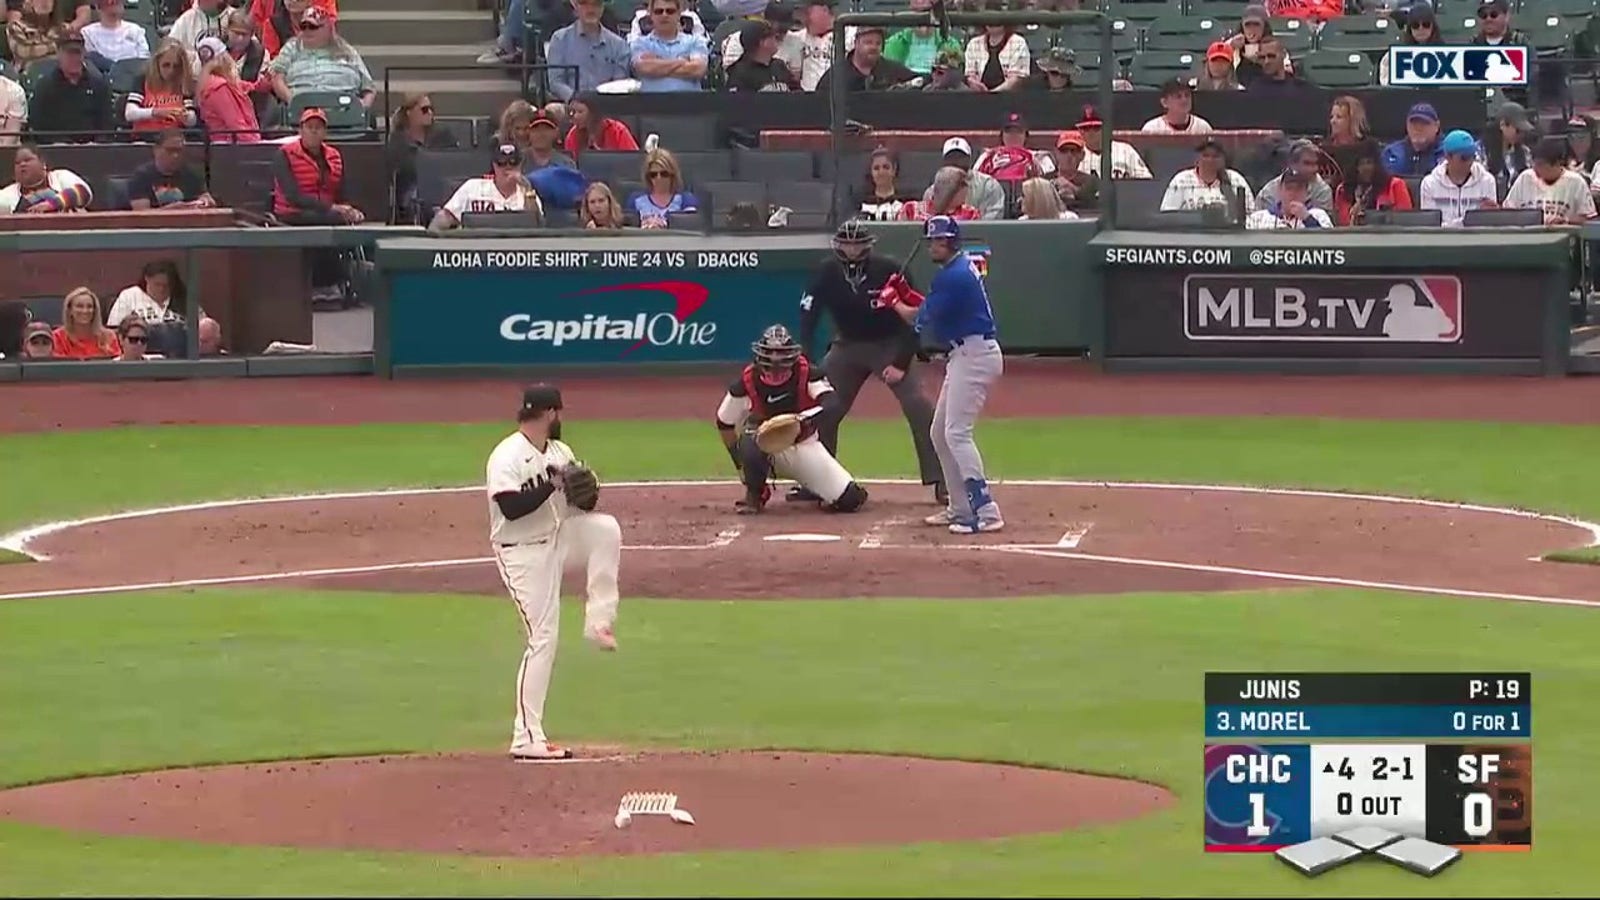 Cubs' Christopher Morel drills a solo homer to extend their lead against the Giants